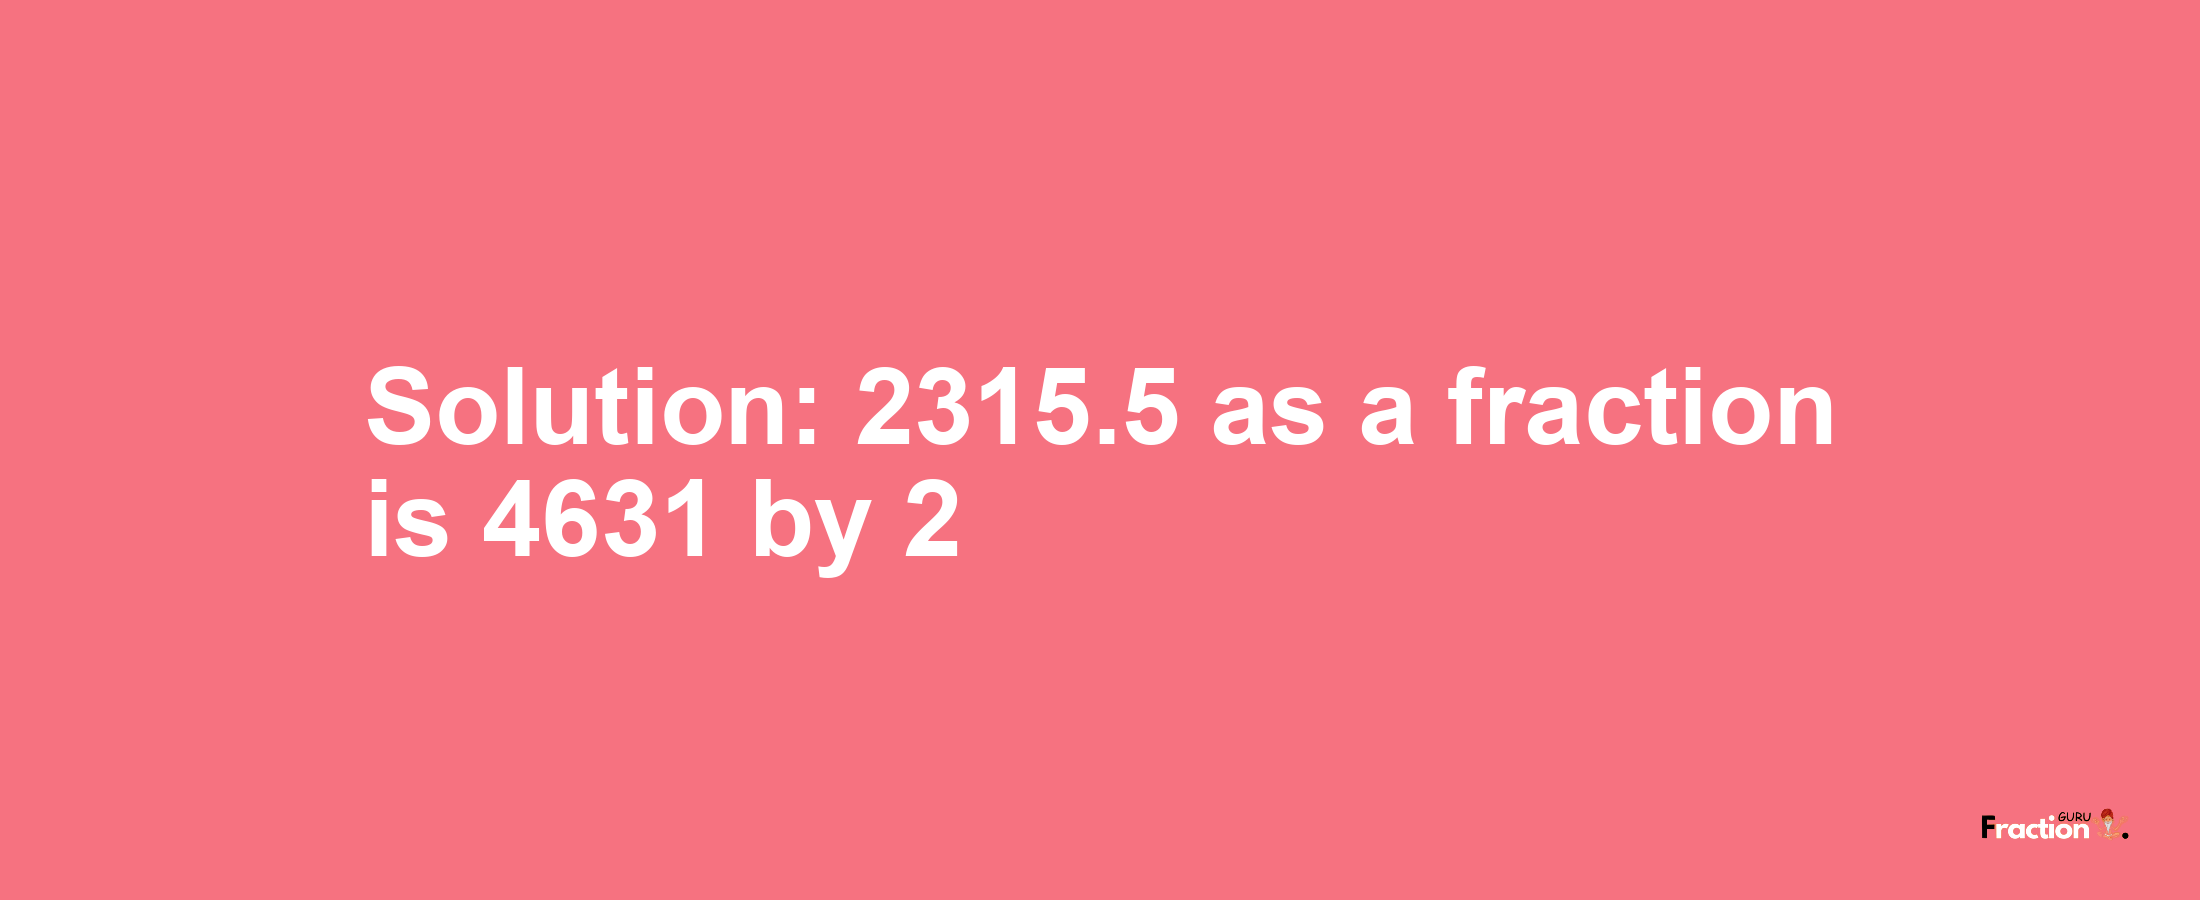 Solution:2315.5 as a fraction is 4631/2